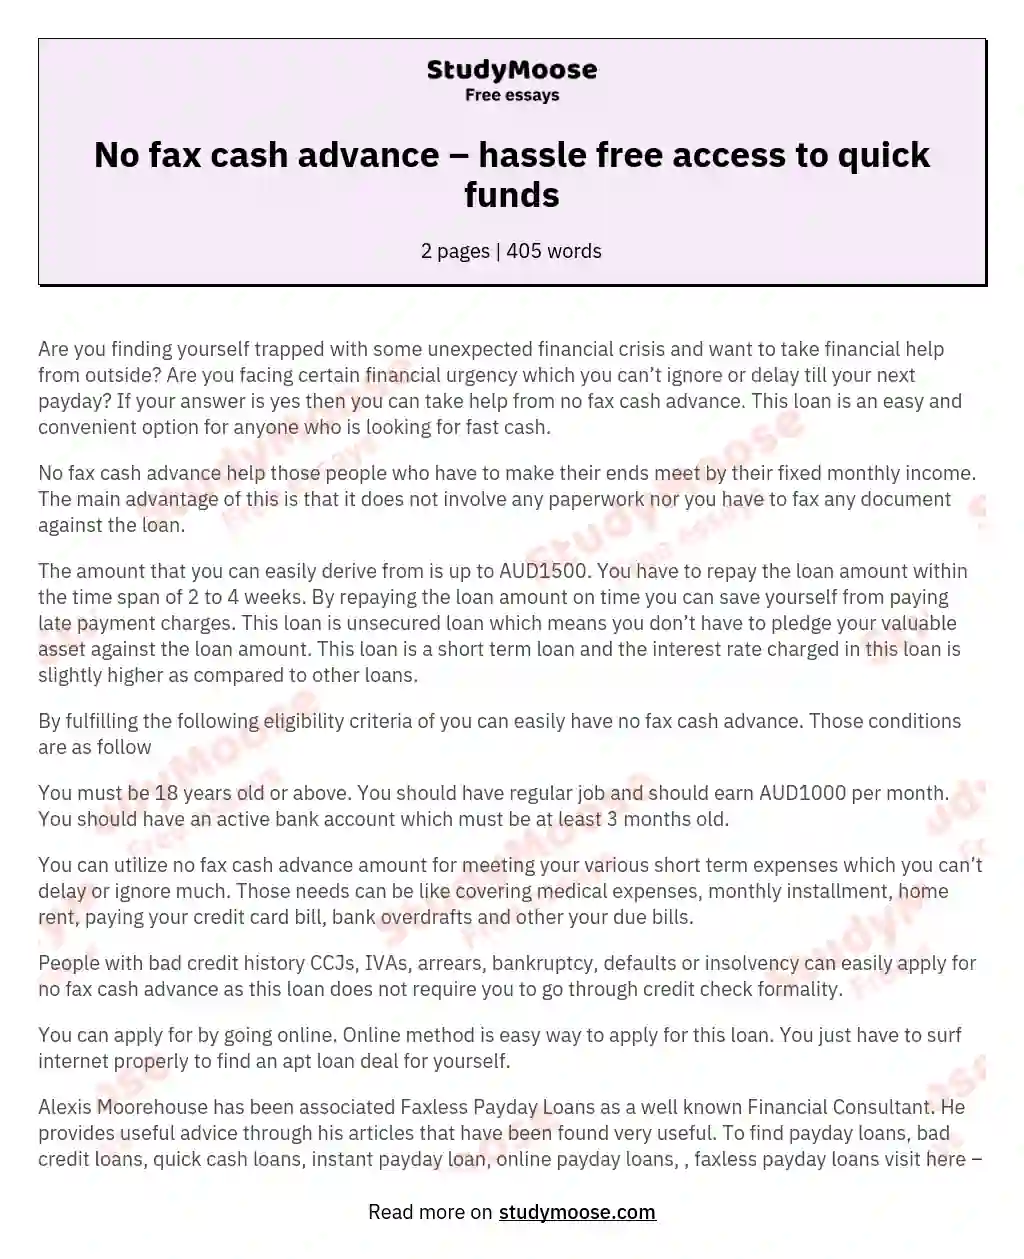 No fax cash advance – hassle free access to quick funds